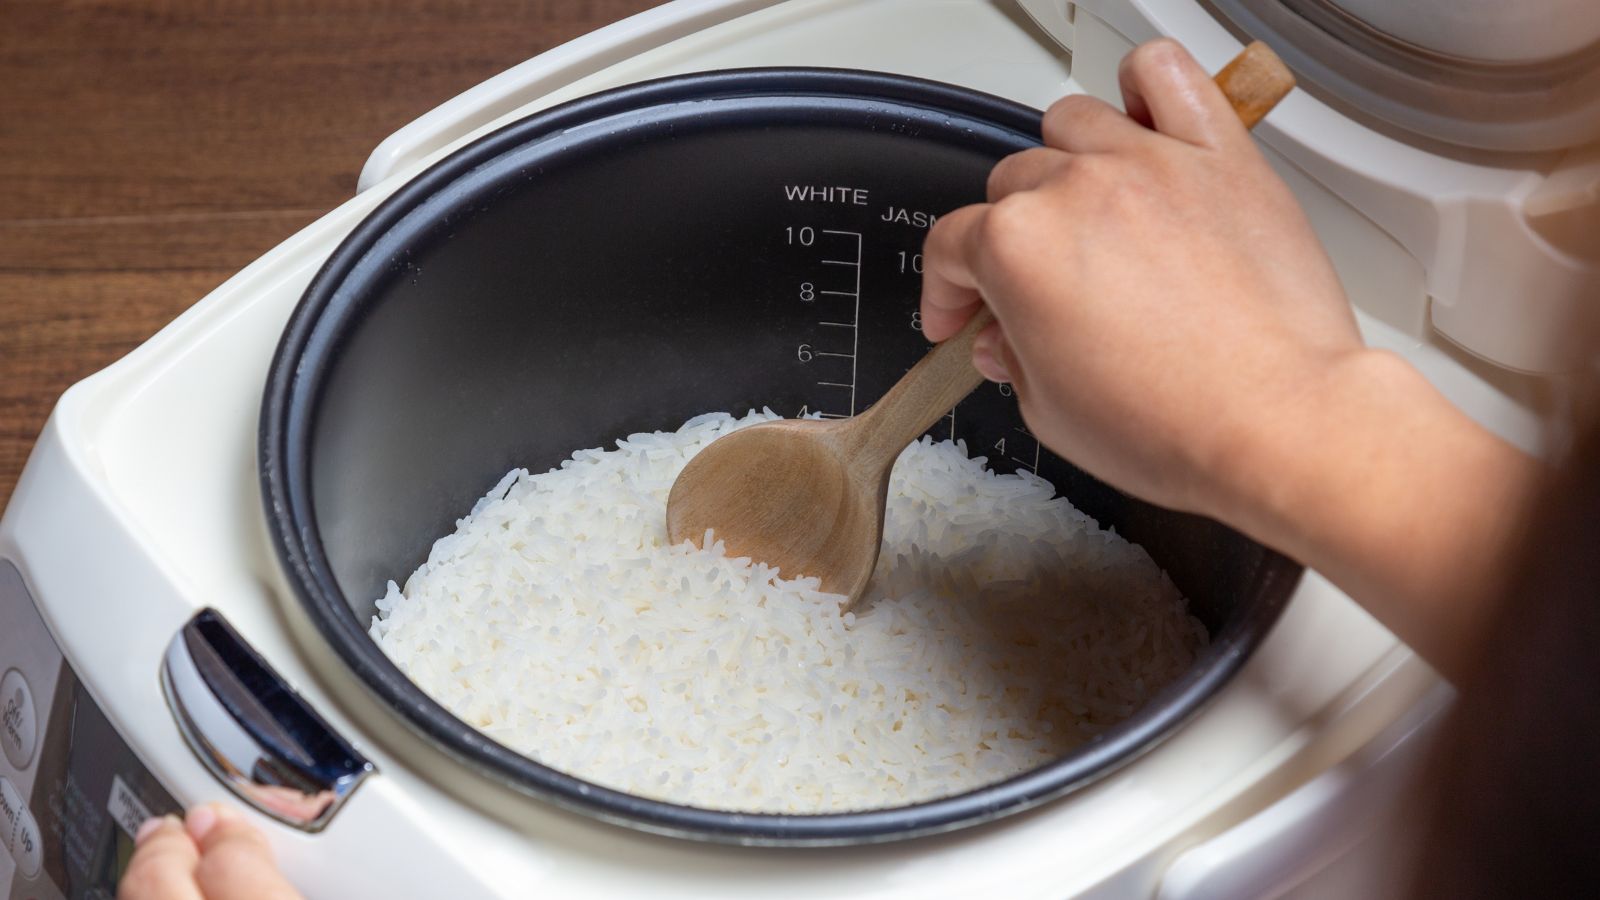 Why We Love the Cuckoo Rice Cooker for 2024